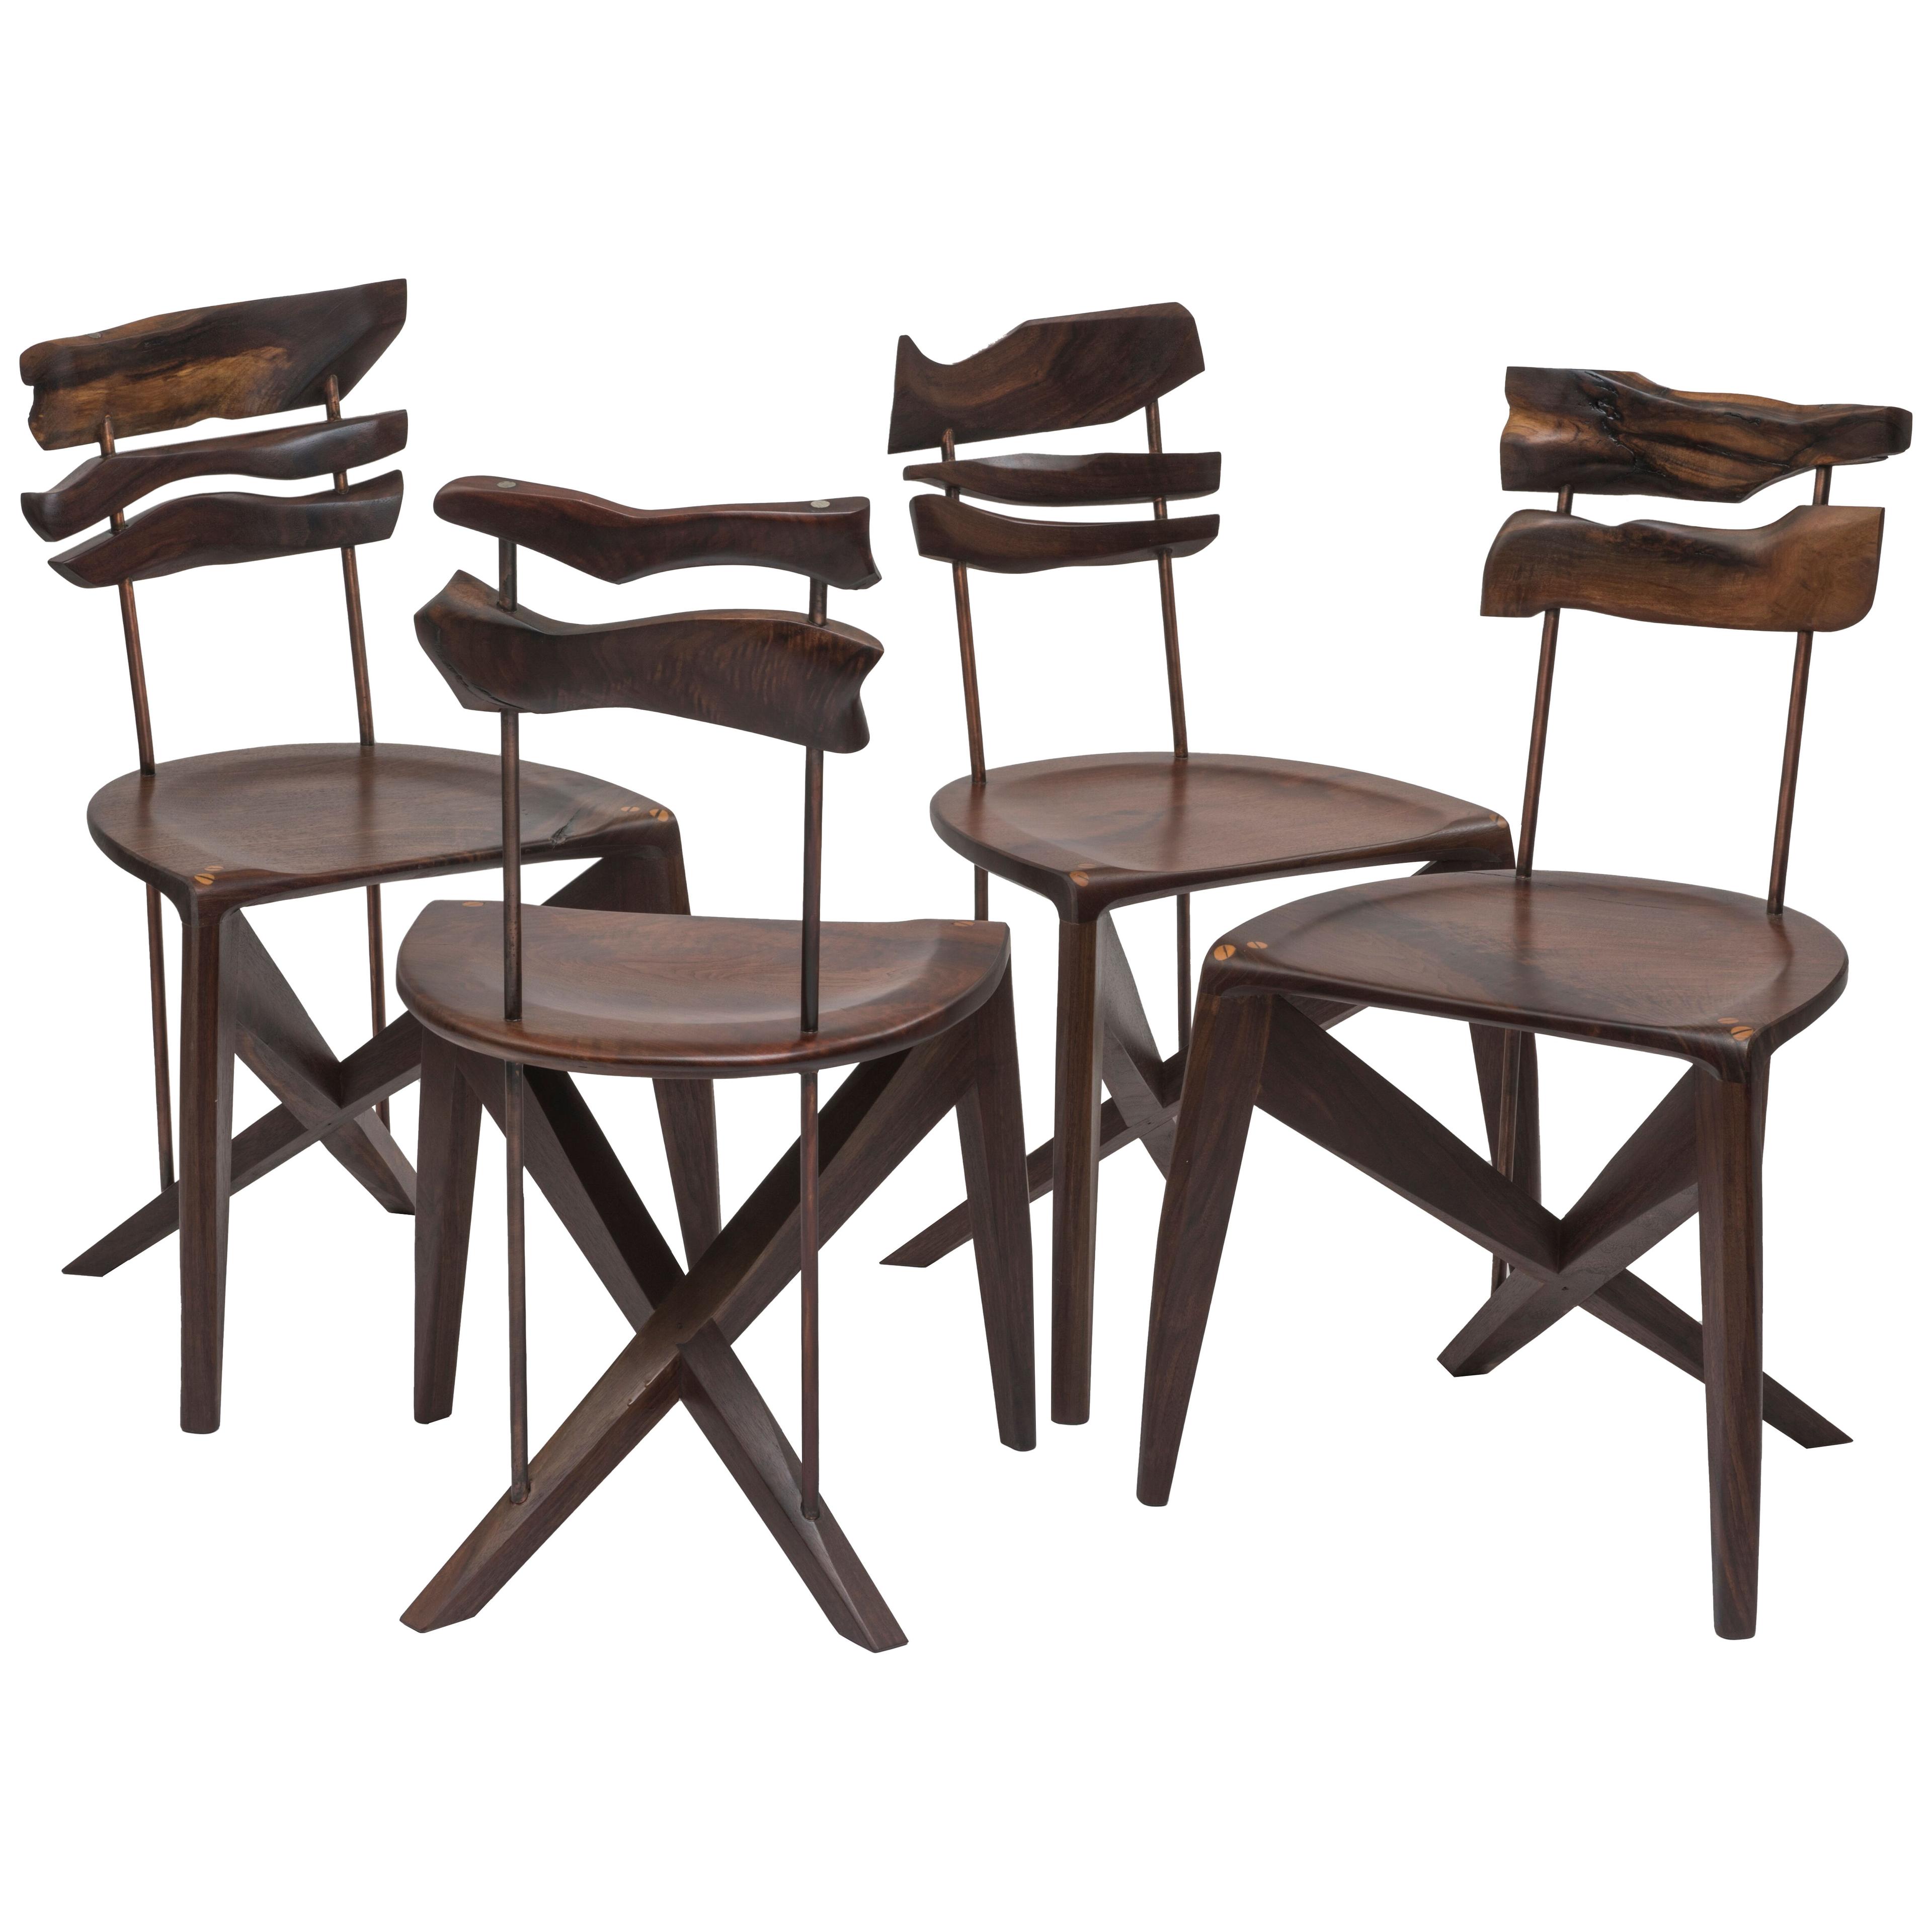 Set of 4 contemporary walnut and steel dining chairs